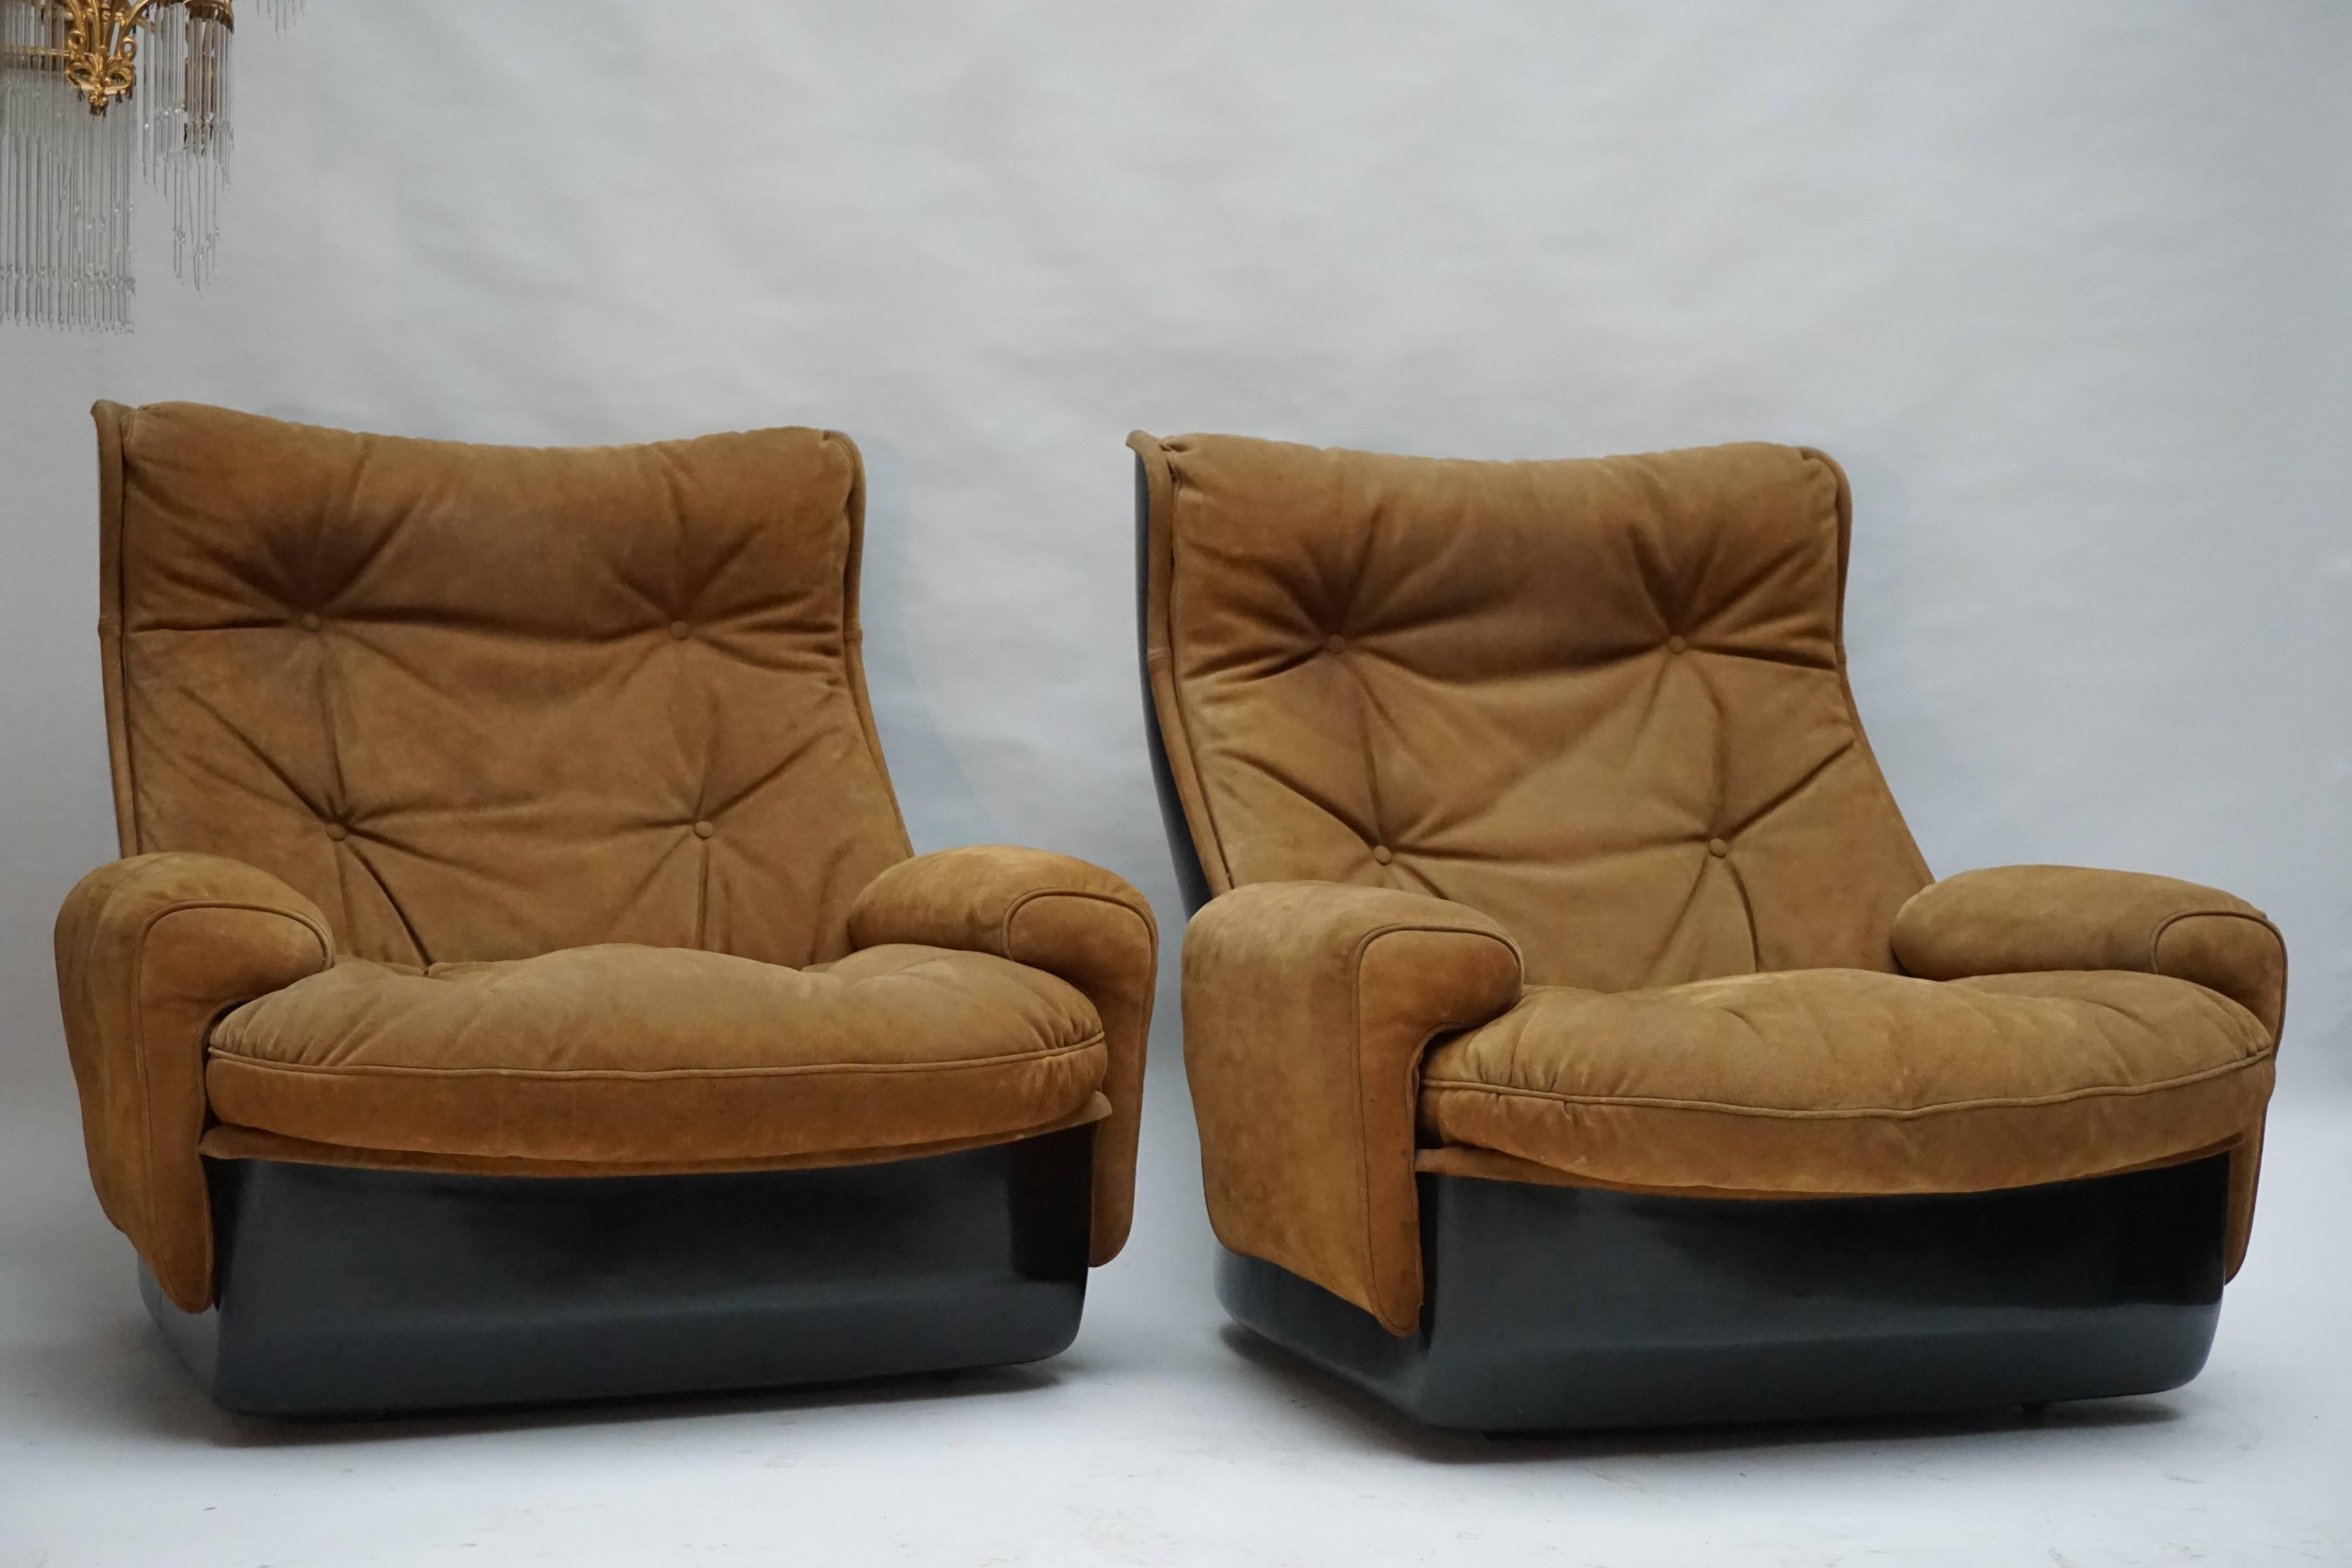 Two lounge armchairs on casters consisting by French manufacturer Airborne International. The shells are made from black fibreglass and the seating is covered in leather buttoned upholstery. This vintage set is in good condition and incredibly